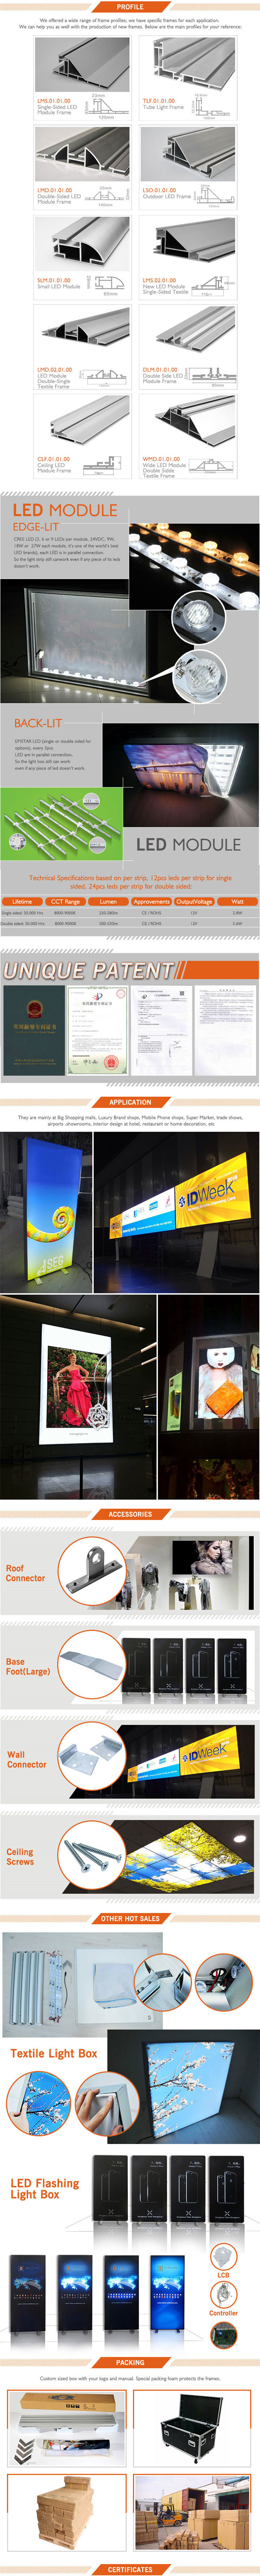 Banner Stand Advertising Light Box Doubled Side for Exhibition Booth Trade Show